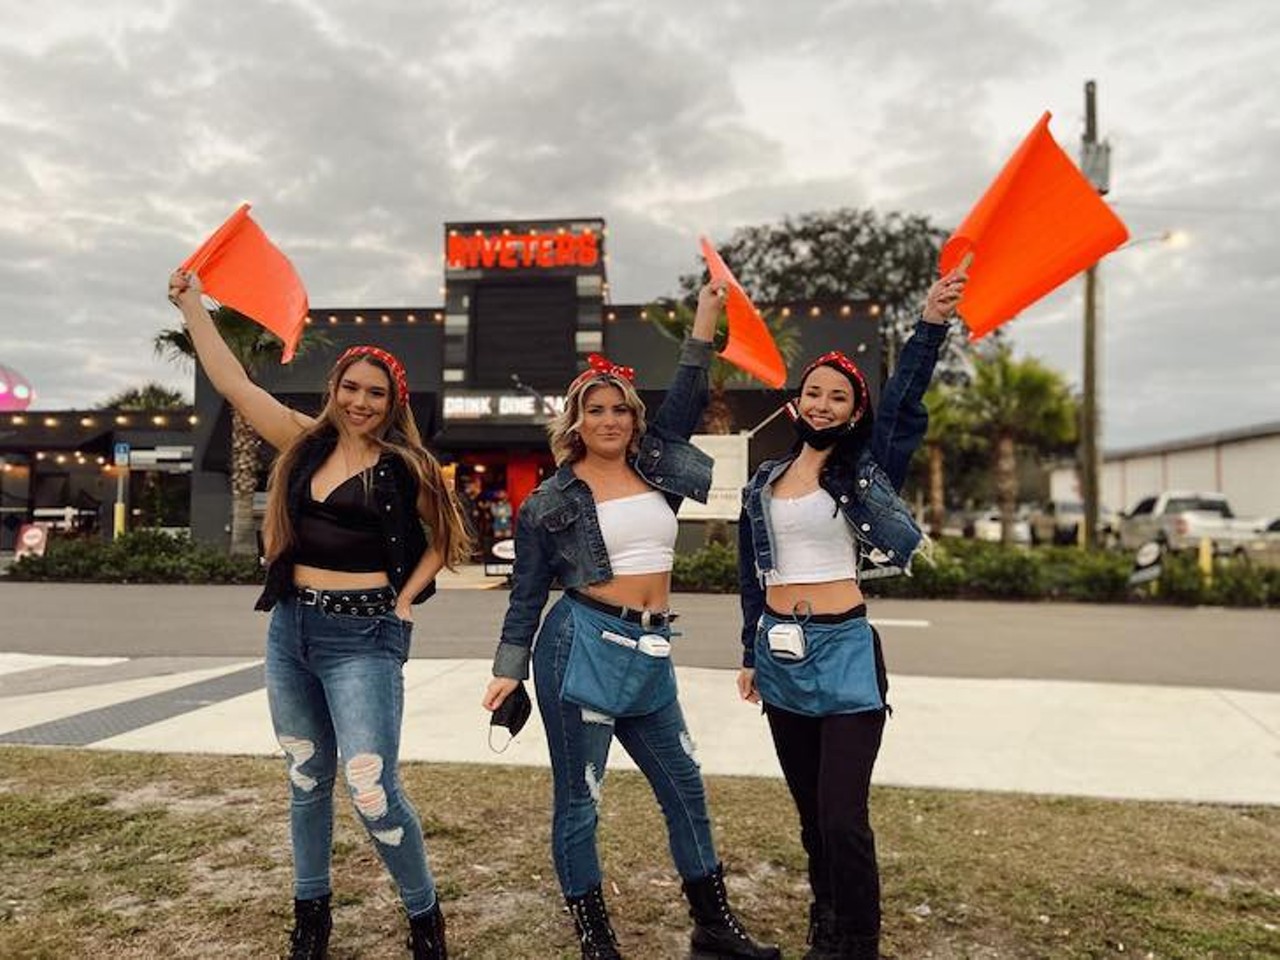 Riveters
2301 N Dale Mabry Hwy., Tampa, (813) 559-1450
As an ode to Rosie the Riveter, servers sport red bandanas and denim tops and are referred to as the bar's "Rosies."  The restaurant shoots for an elevated sports bar menu alongside a lineup of healthier options, with menu item names continuing with the theme&#150;Munition Mussels, Hellcat Wings and Propaganda Poutine.